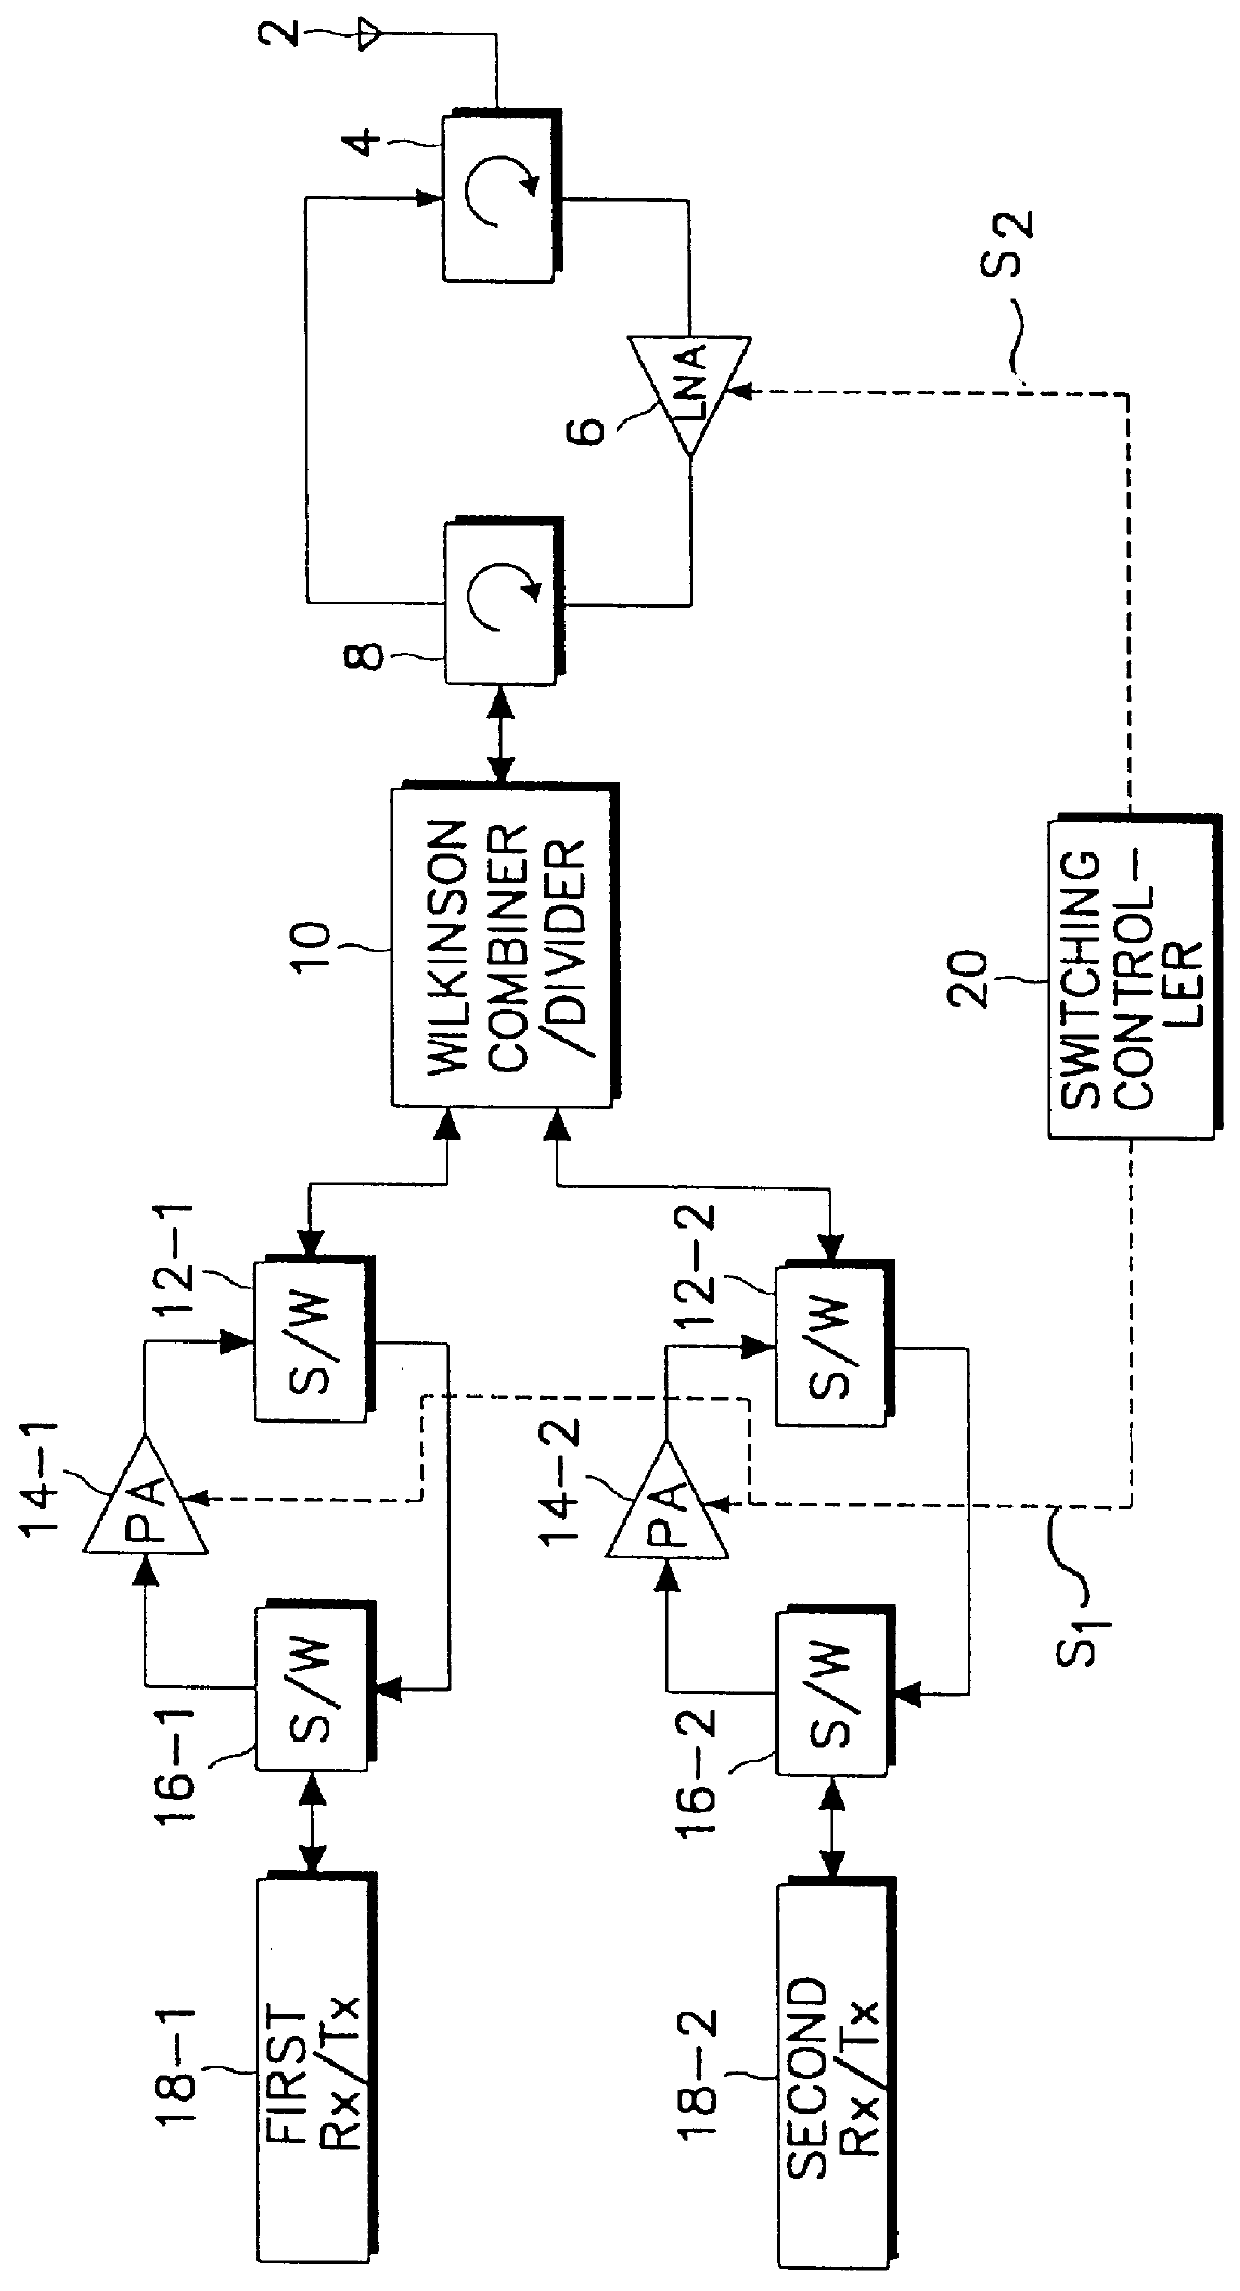 Transmitter/receiver for use in multichannel time division duplexing system providing isolation between transmission channels and reception channels